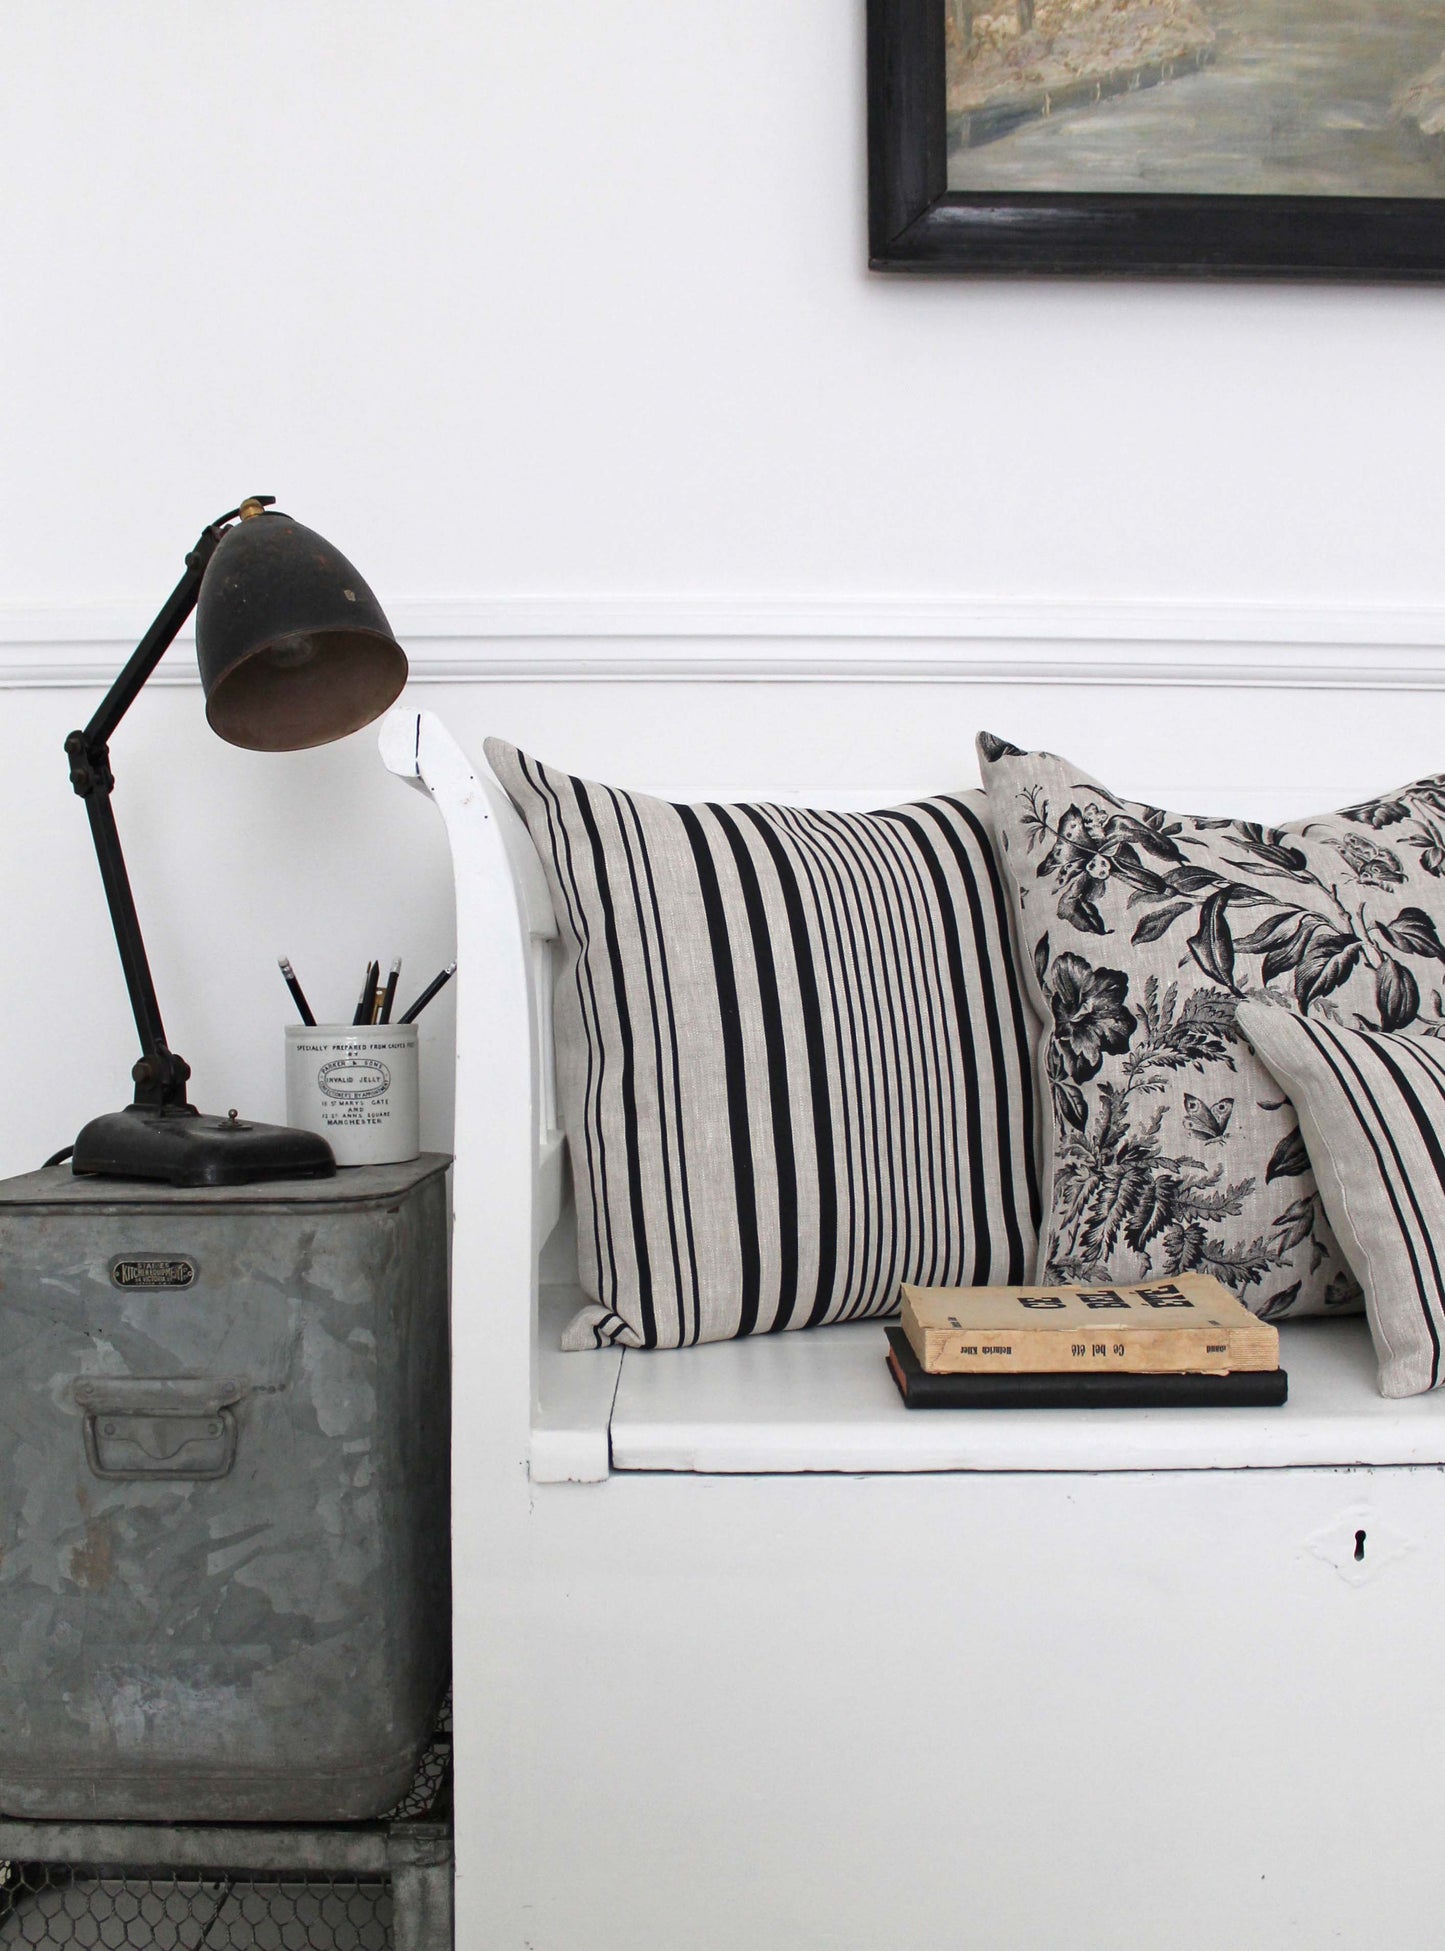 Stanley Stripe Soot Natural Linen Cushions